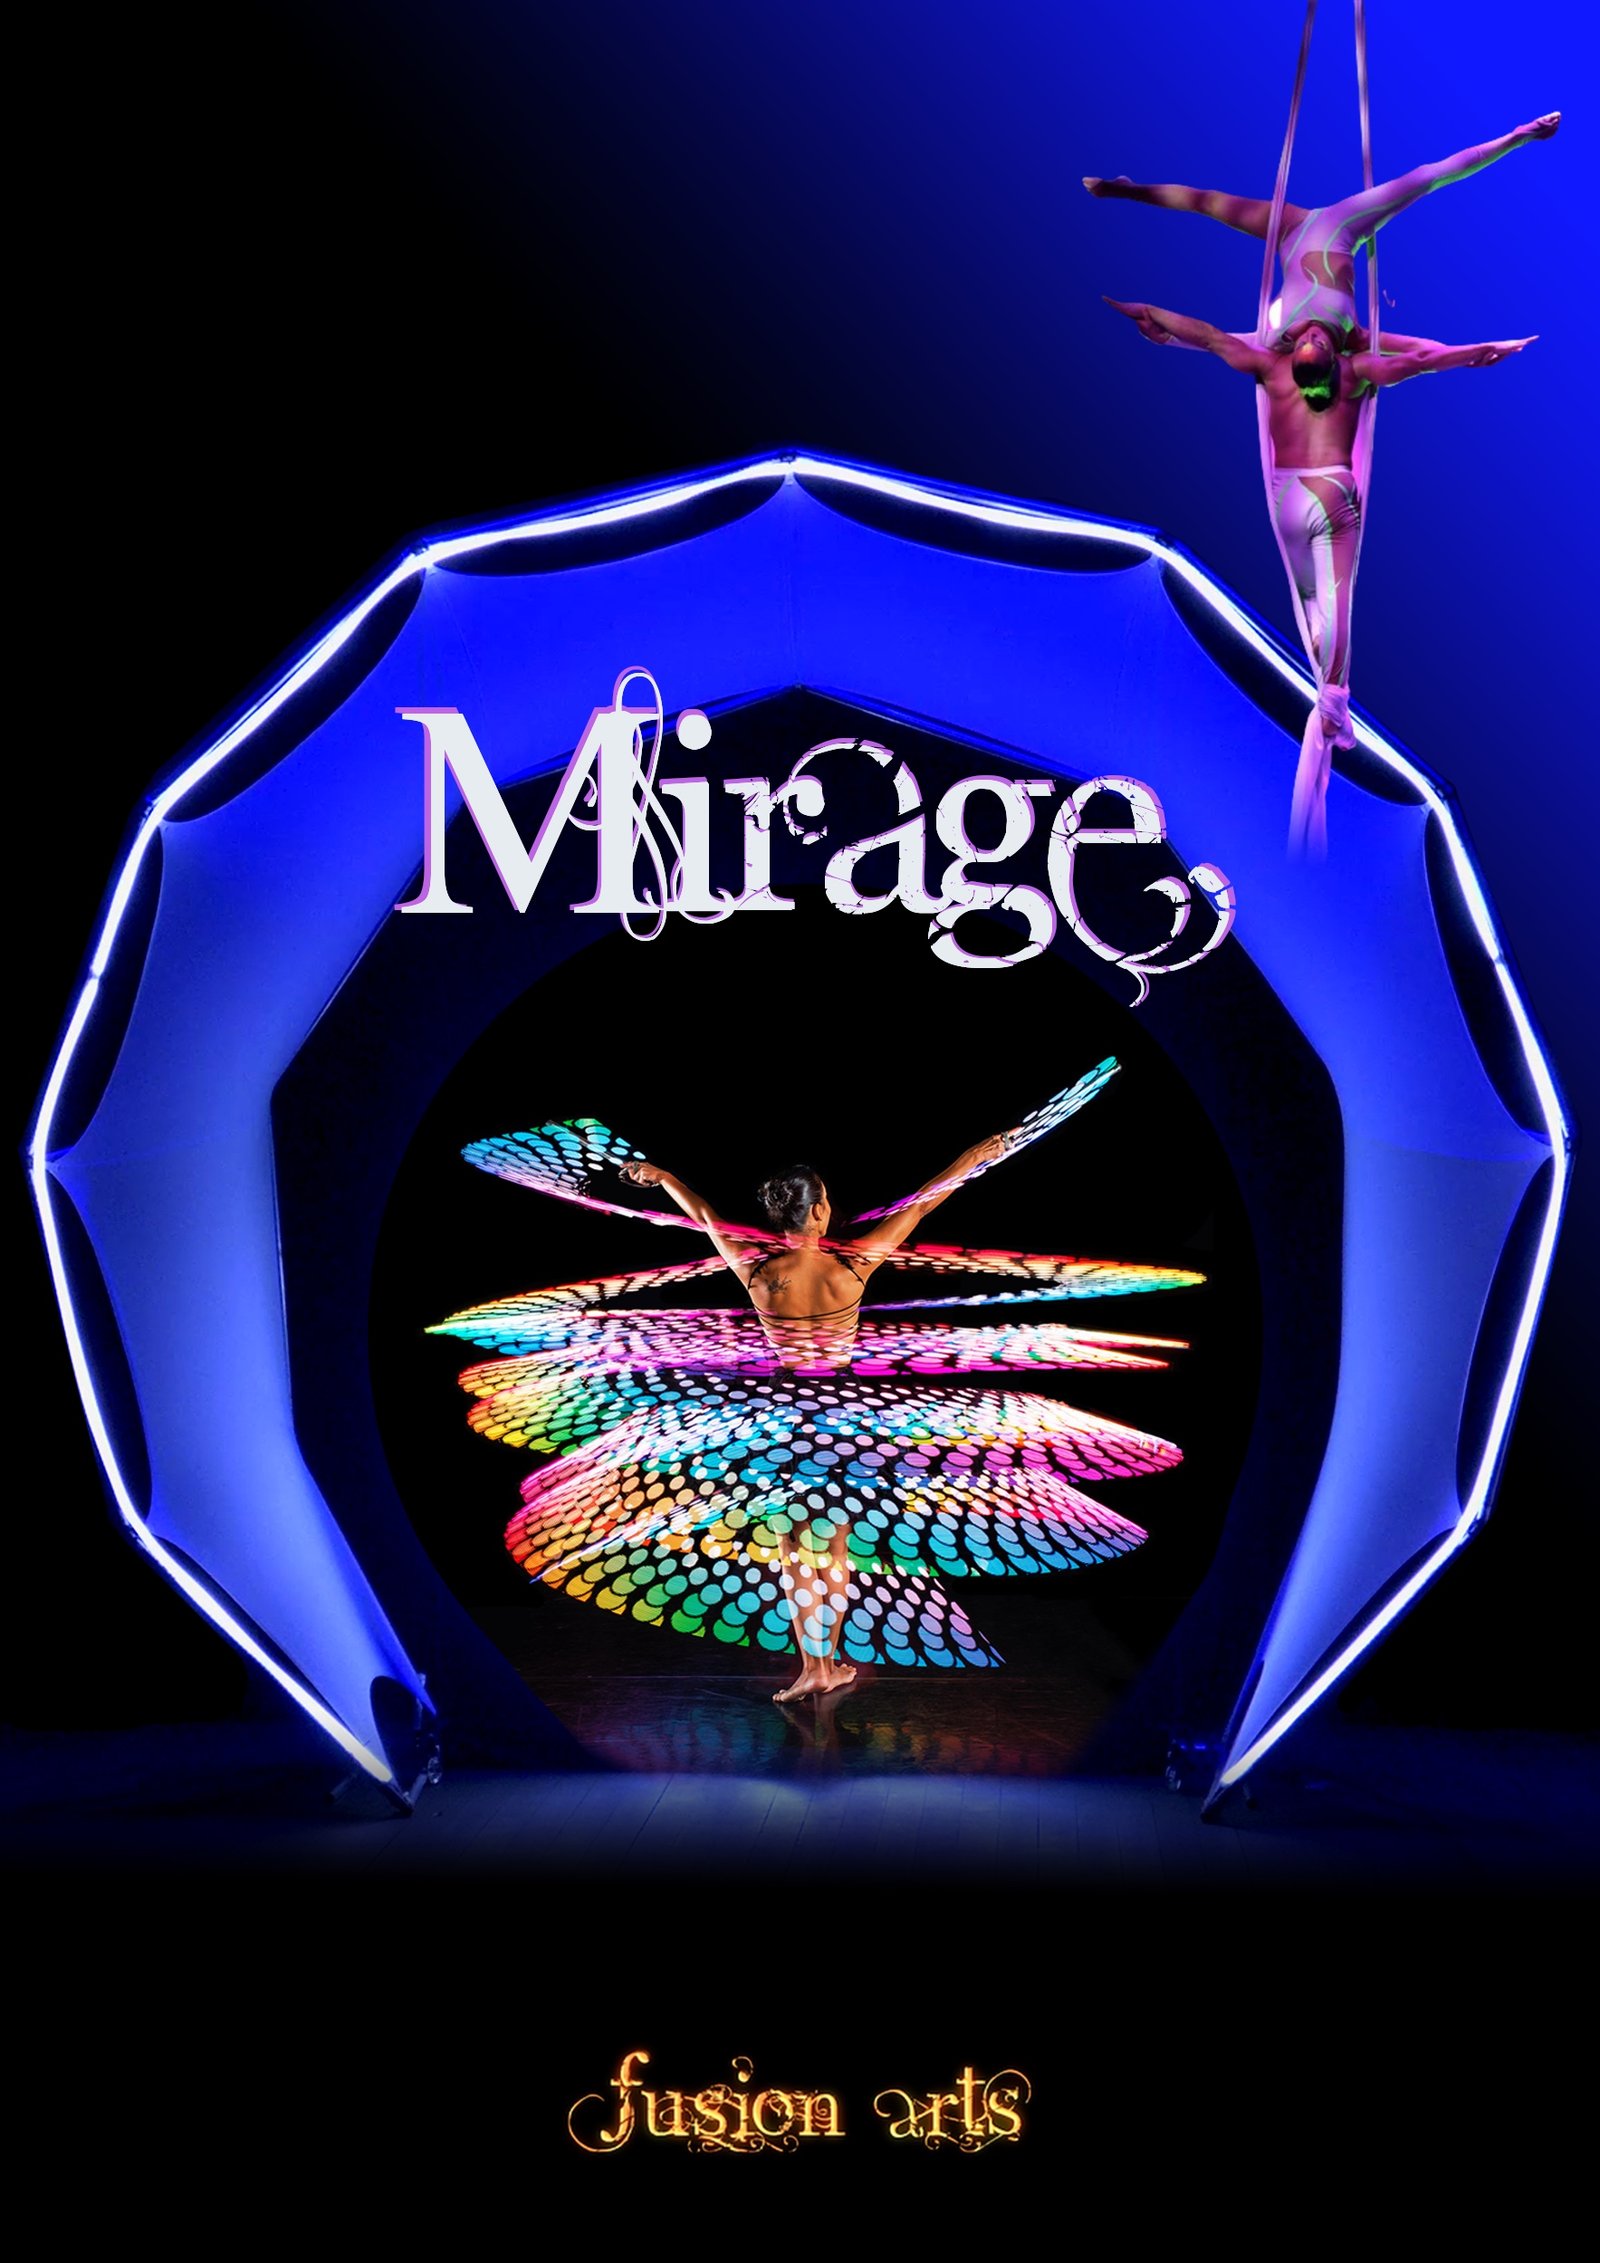 Mirage circus show France